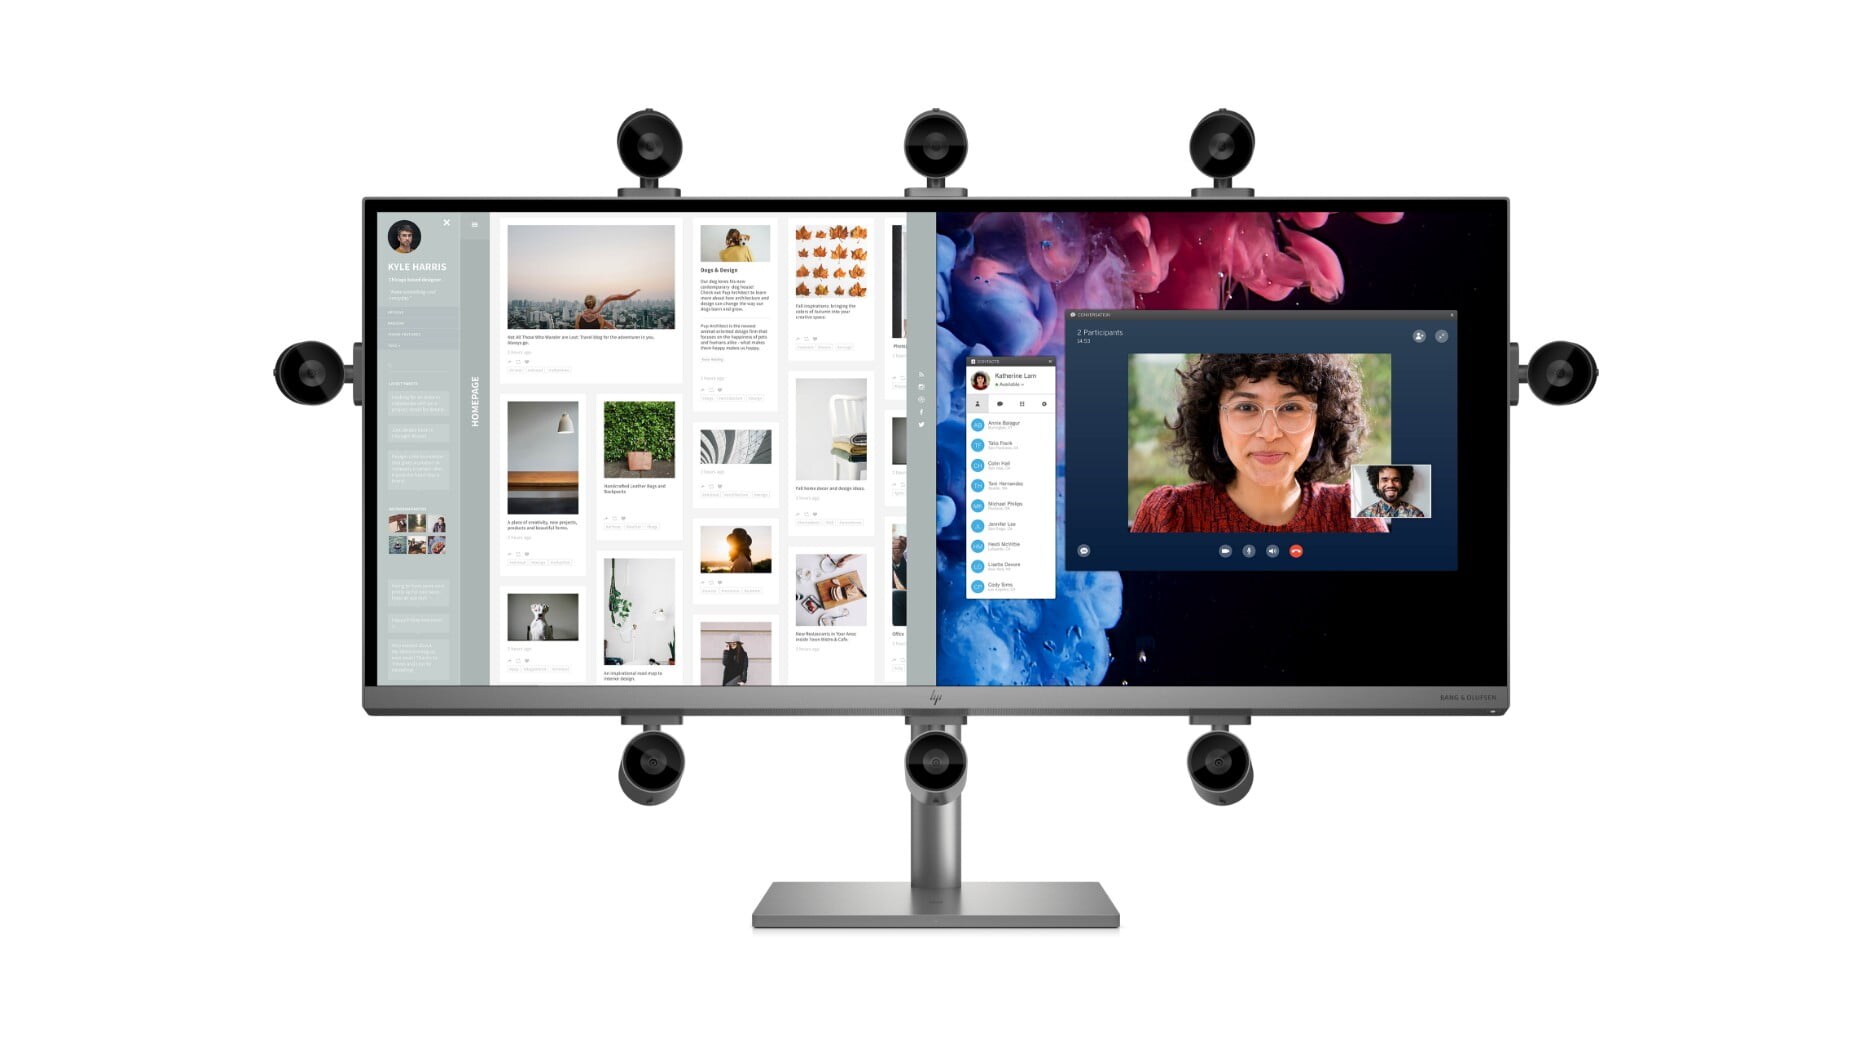 Eights cameras being held in different places around an HP ENVY 34-inch All-in-One Desktop